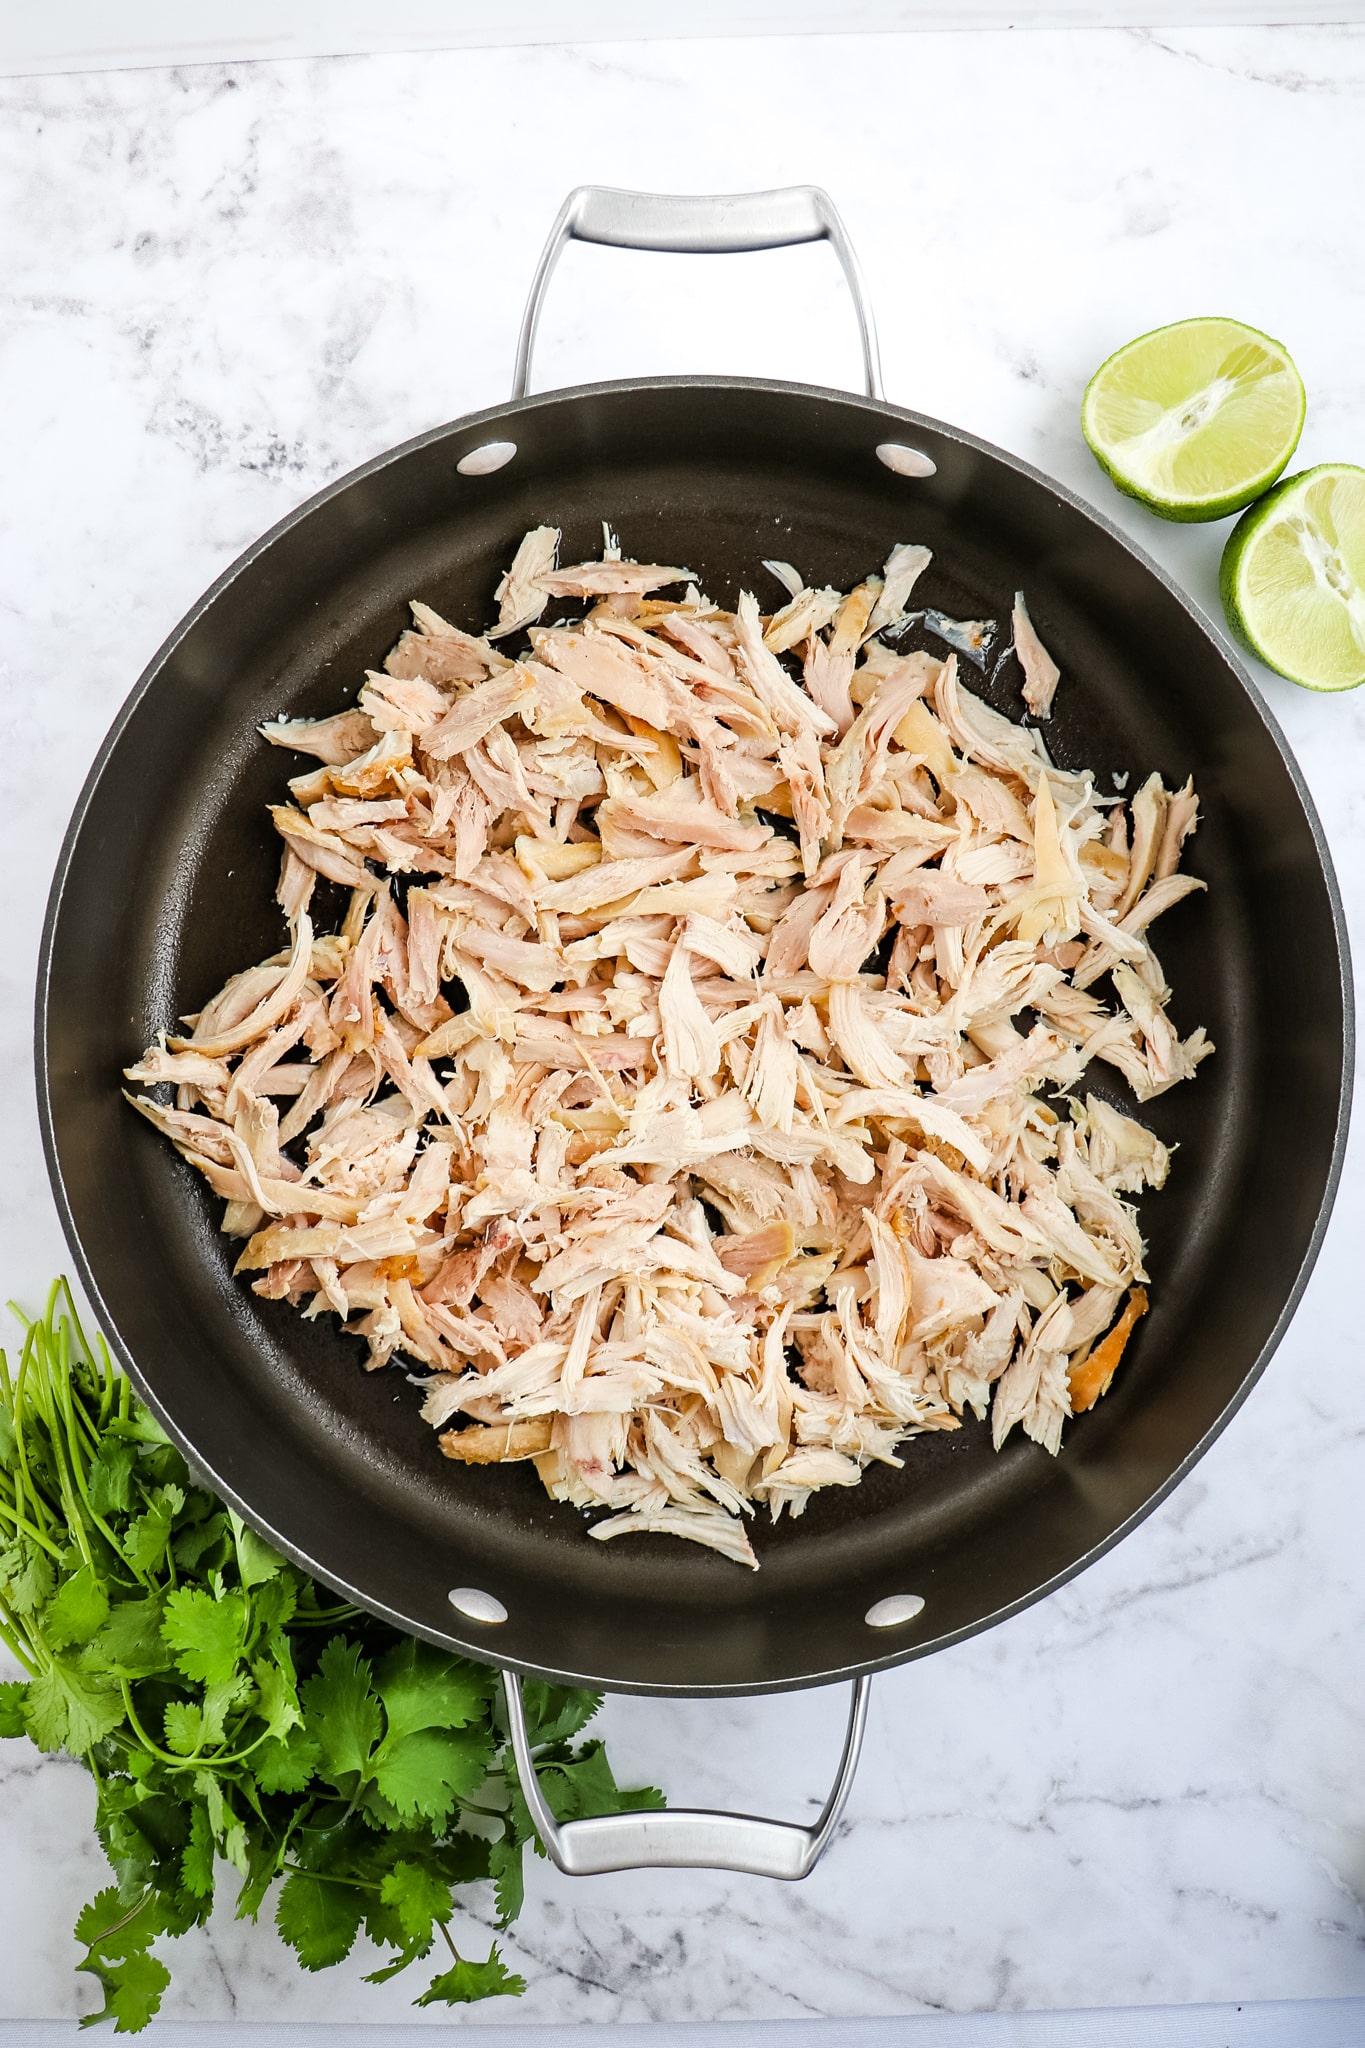 Shredded chicken in a large skillet with water. Limes on the side.